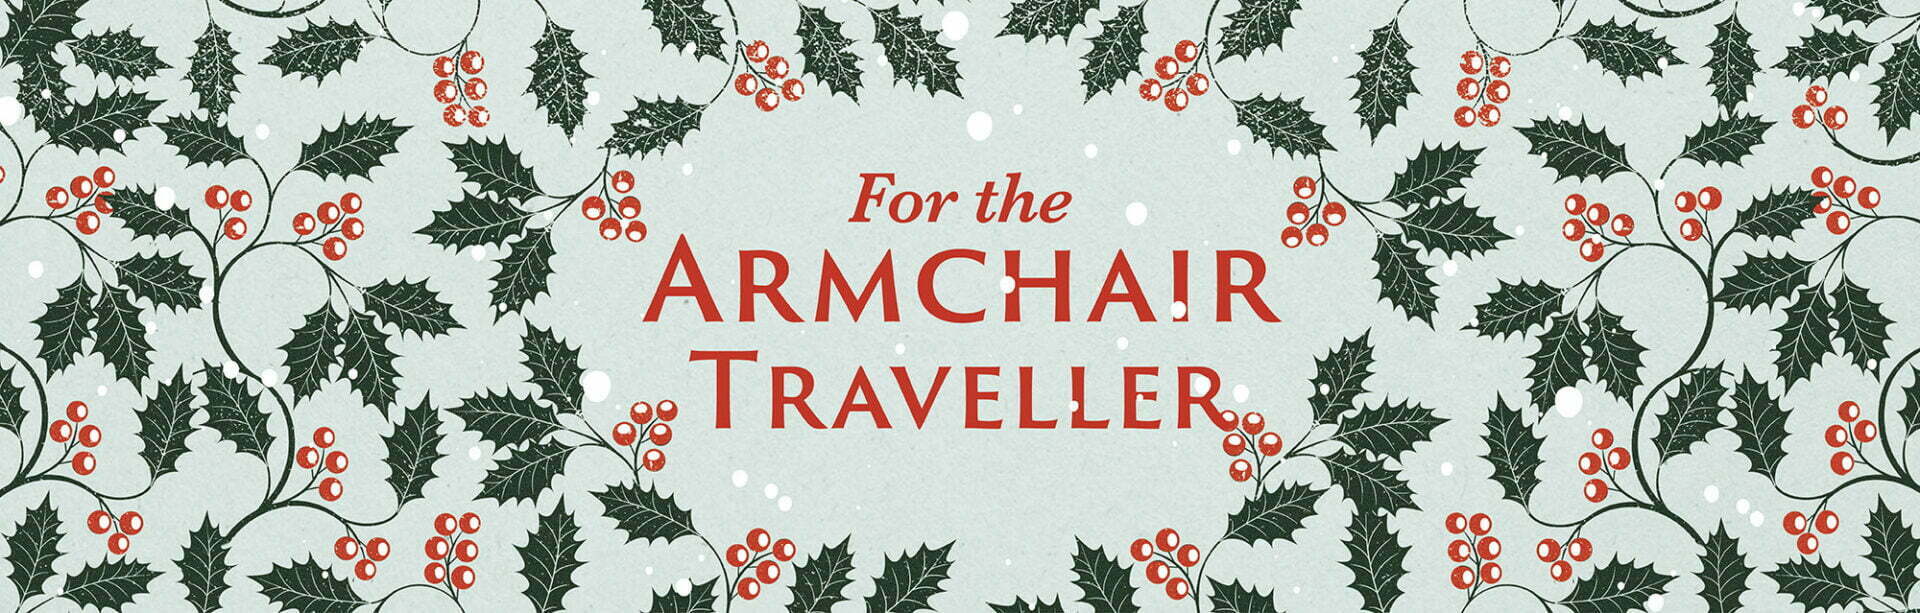 https://faber.wp.dev.diffusion.digital/wp-content/uploads/2021/11/Faber-Christmas-Gift-Guide-For-the-Armchair-Traveller-1920x613.jpg